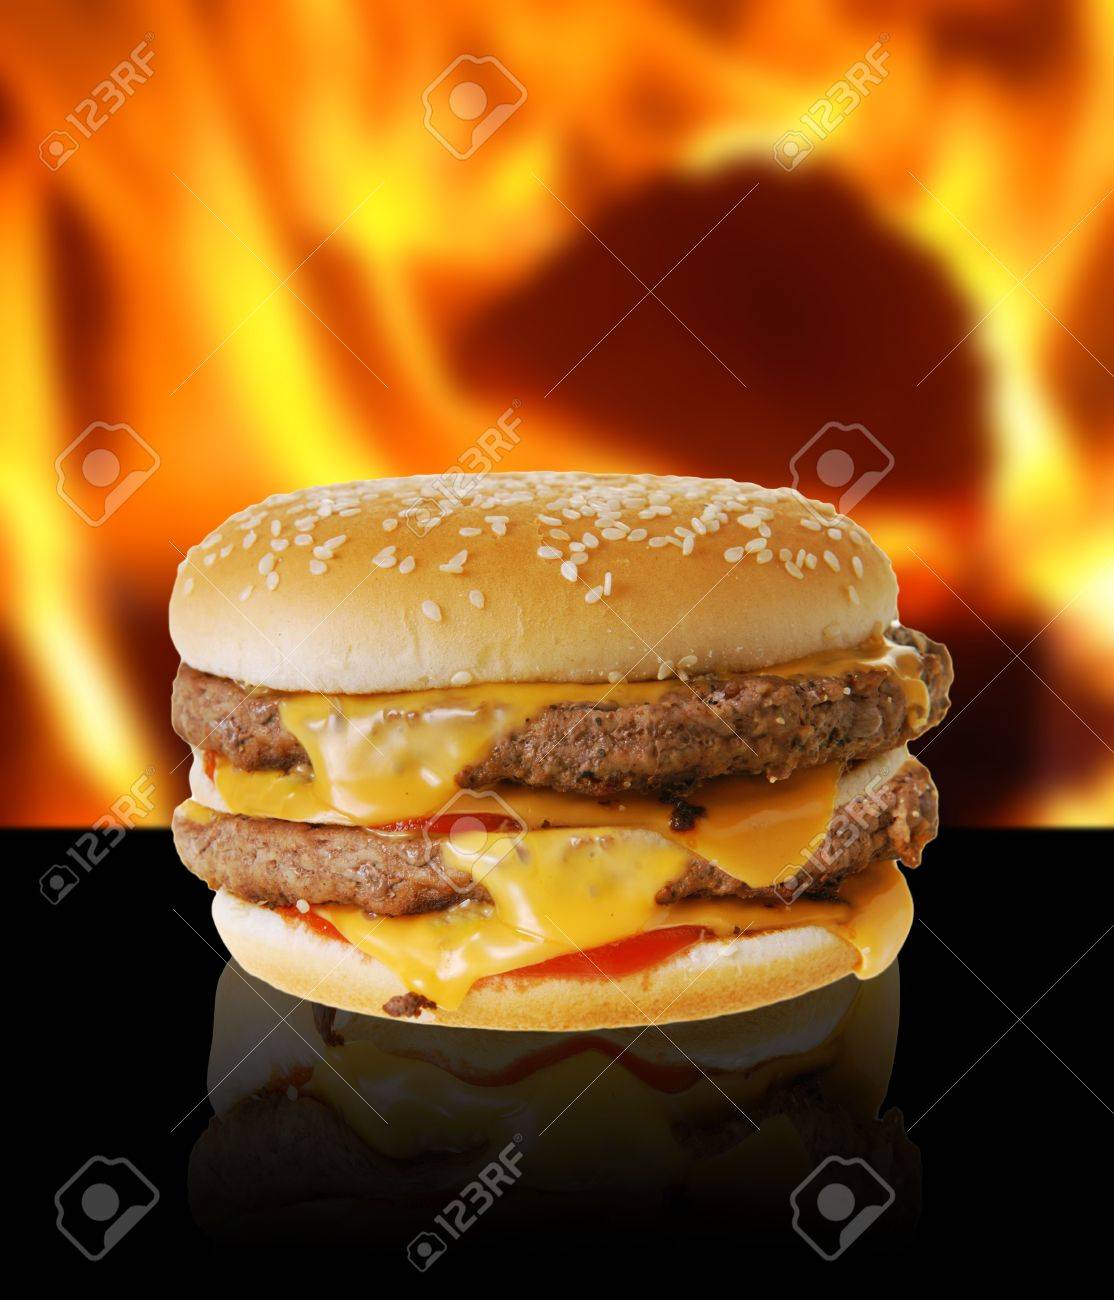 Double Cheeseburger On Flaming Background Stock Photo Picture And